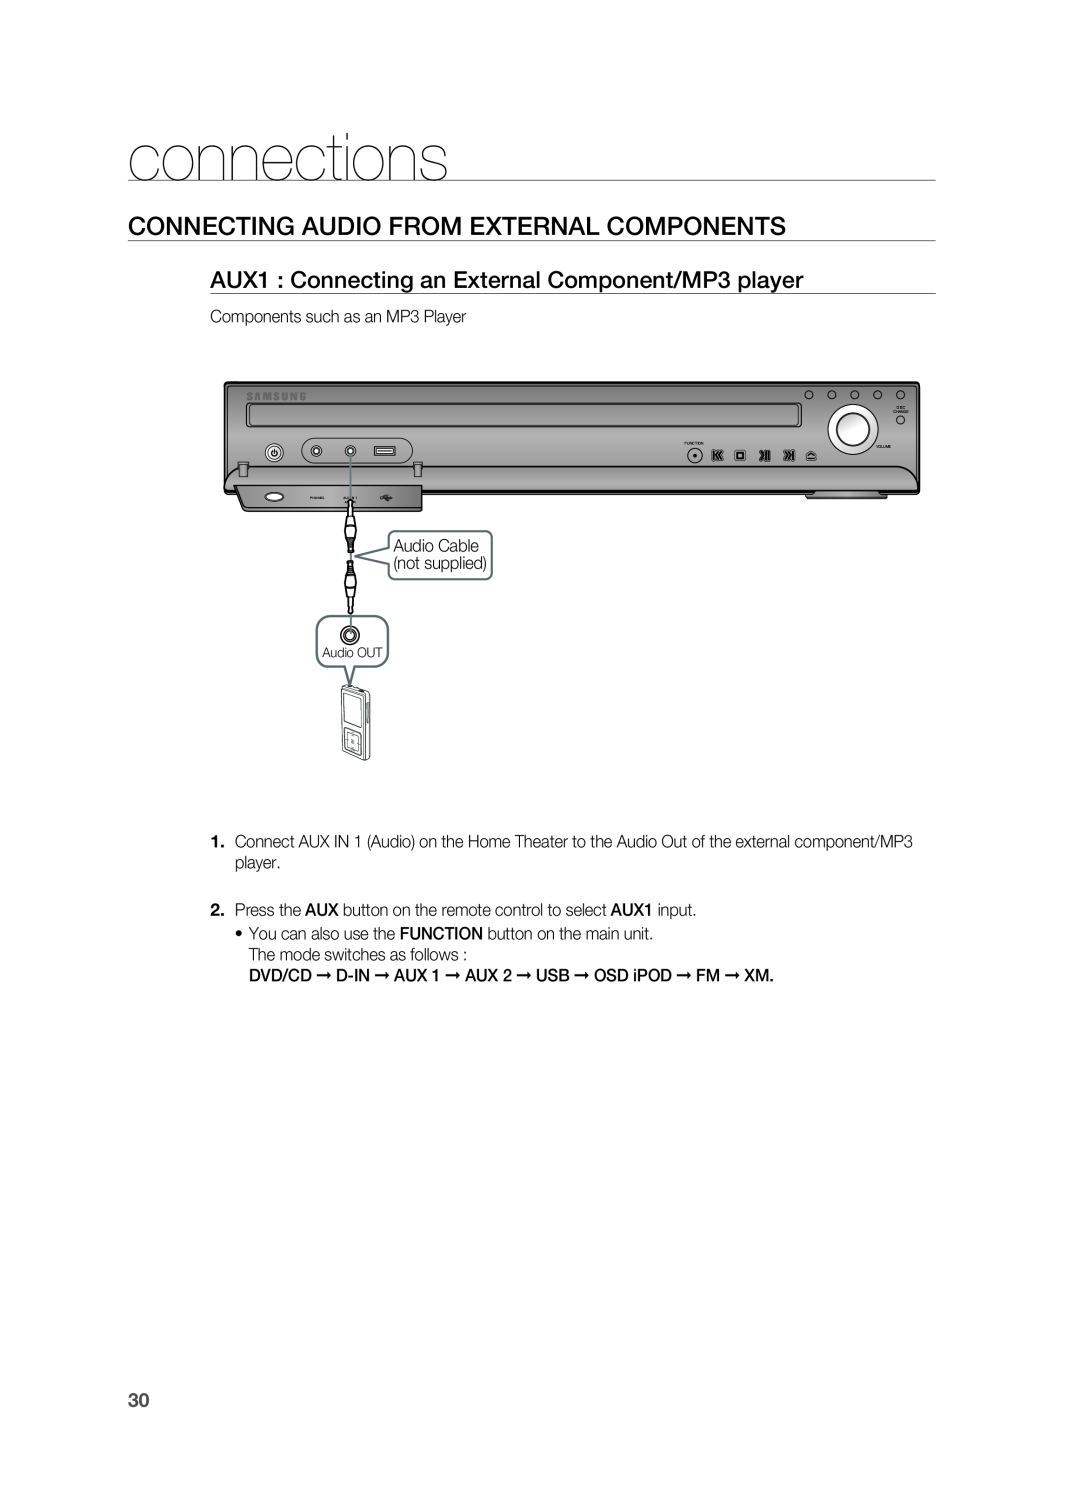 Samsung HT-TZ515 user manual Connecting Audio from External Components, connections 